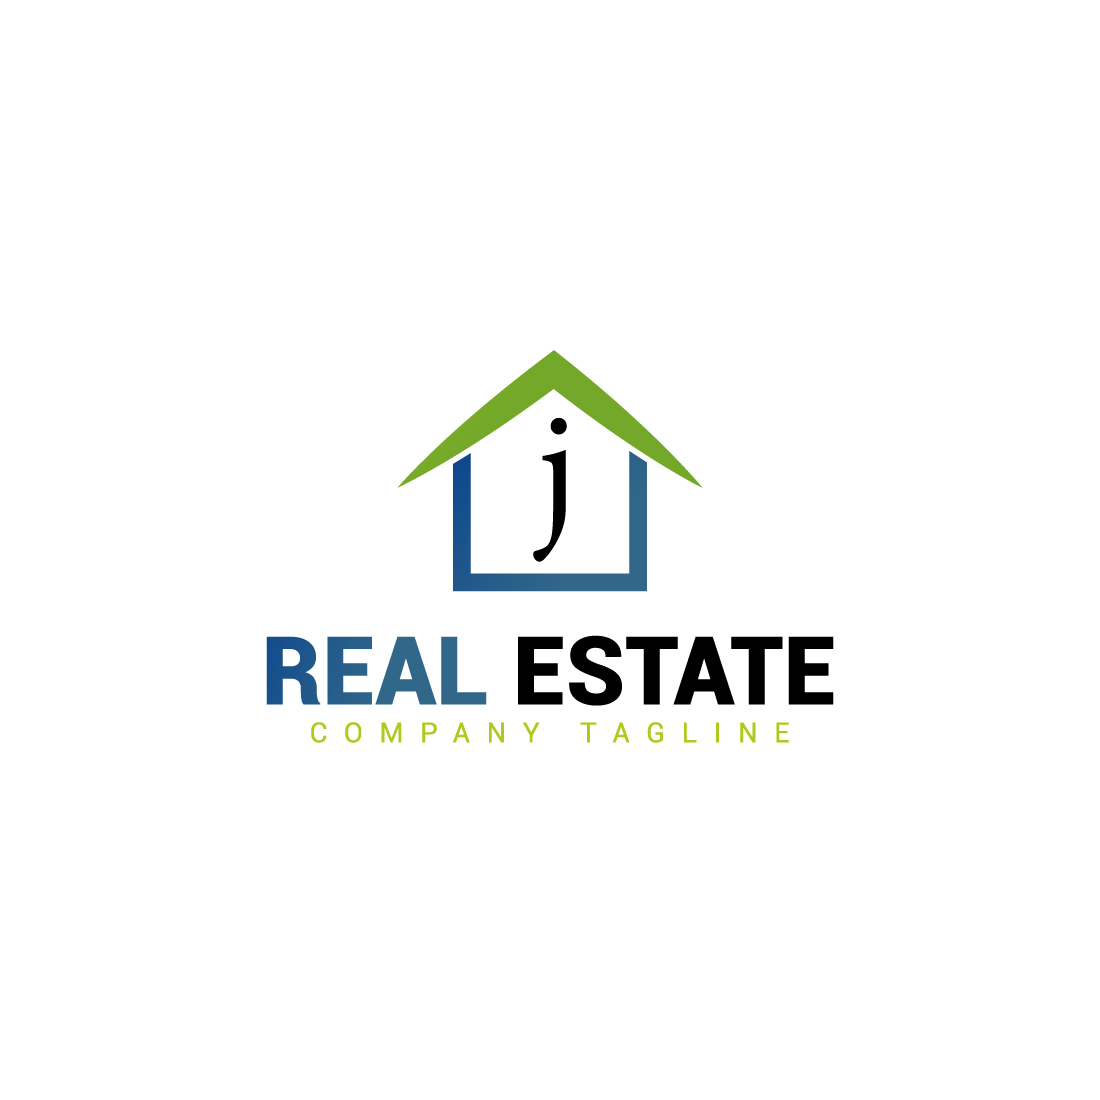 Real estate logo with green, dark blue color and J letter preview image.